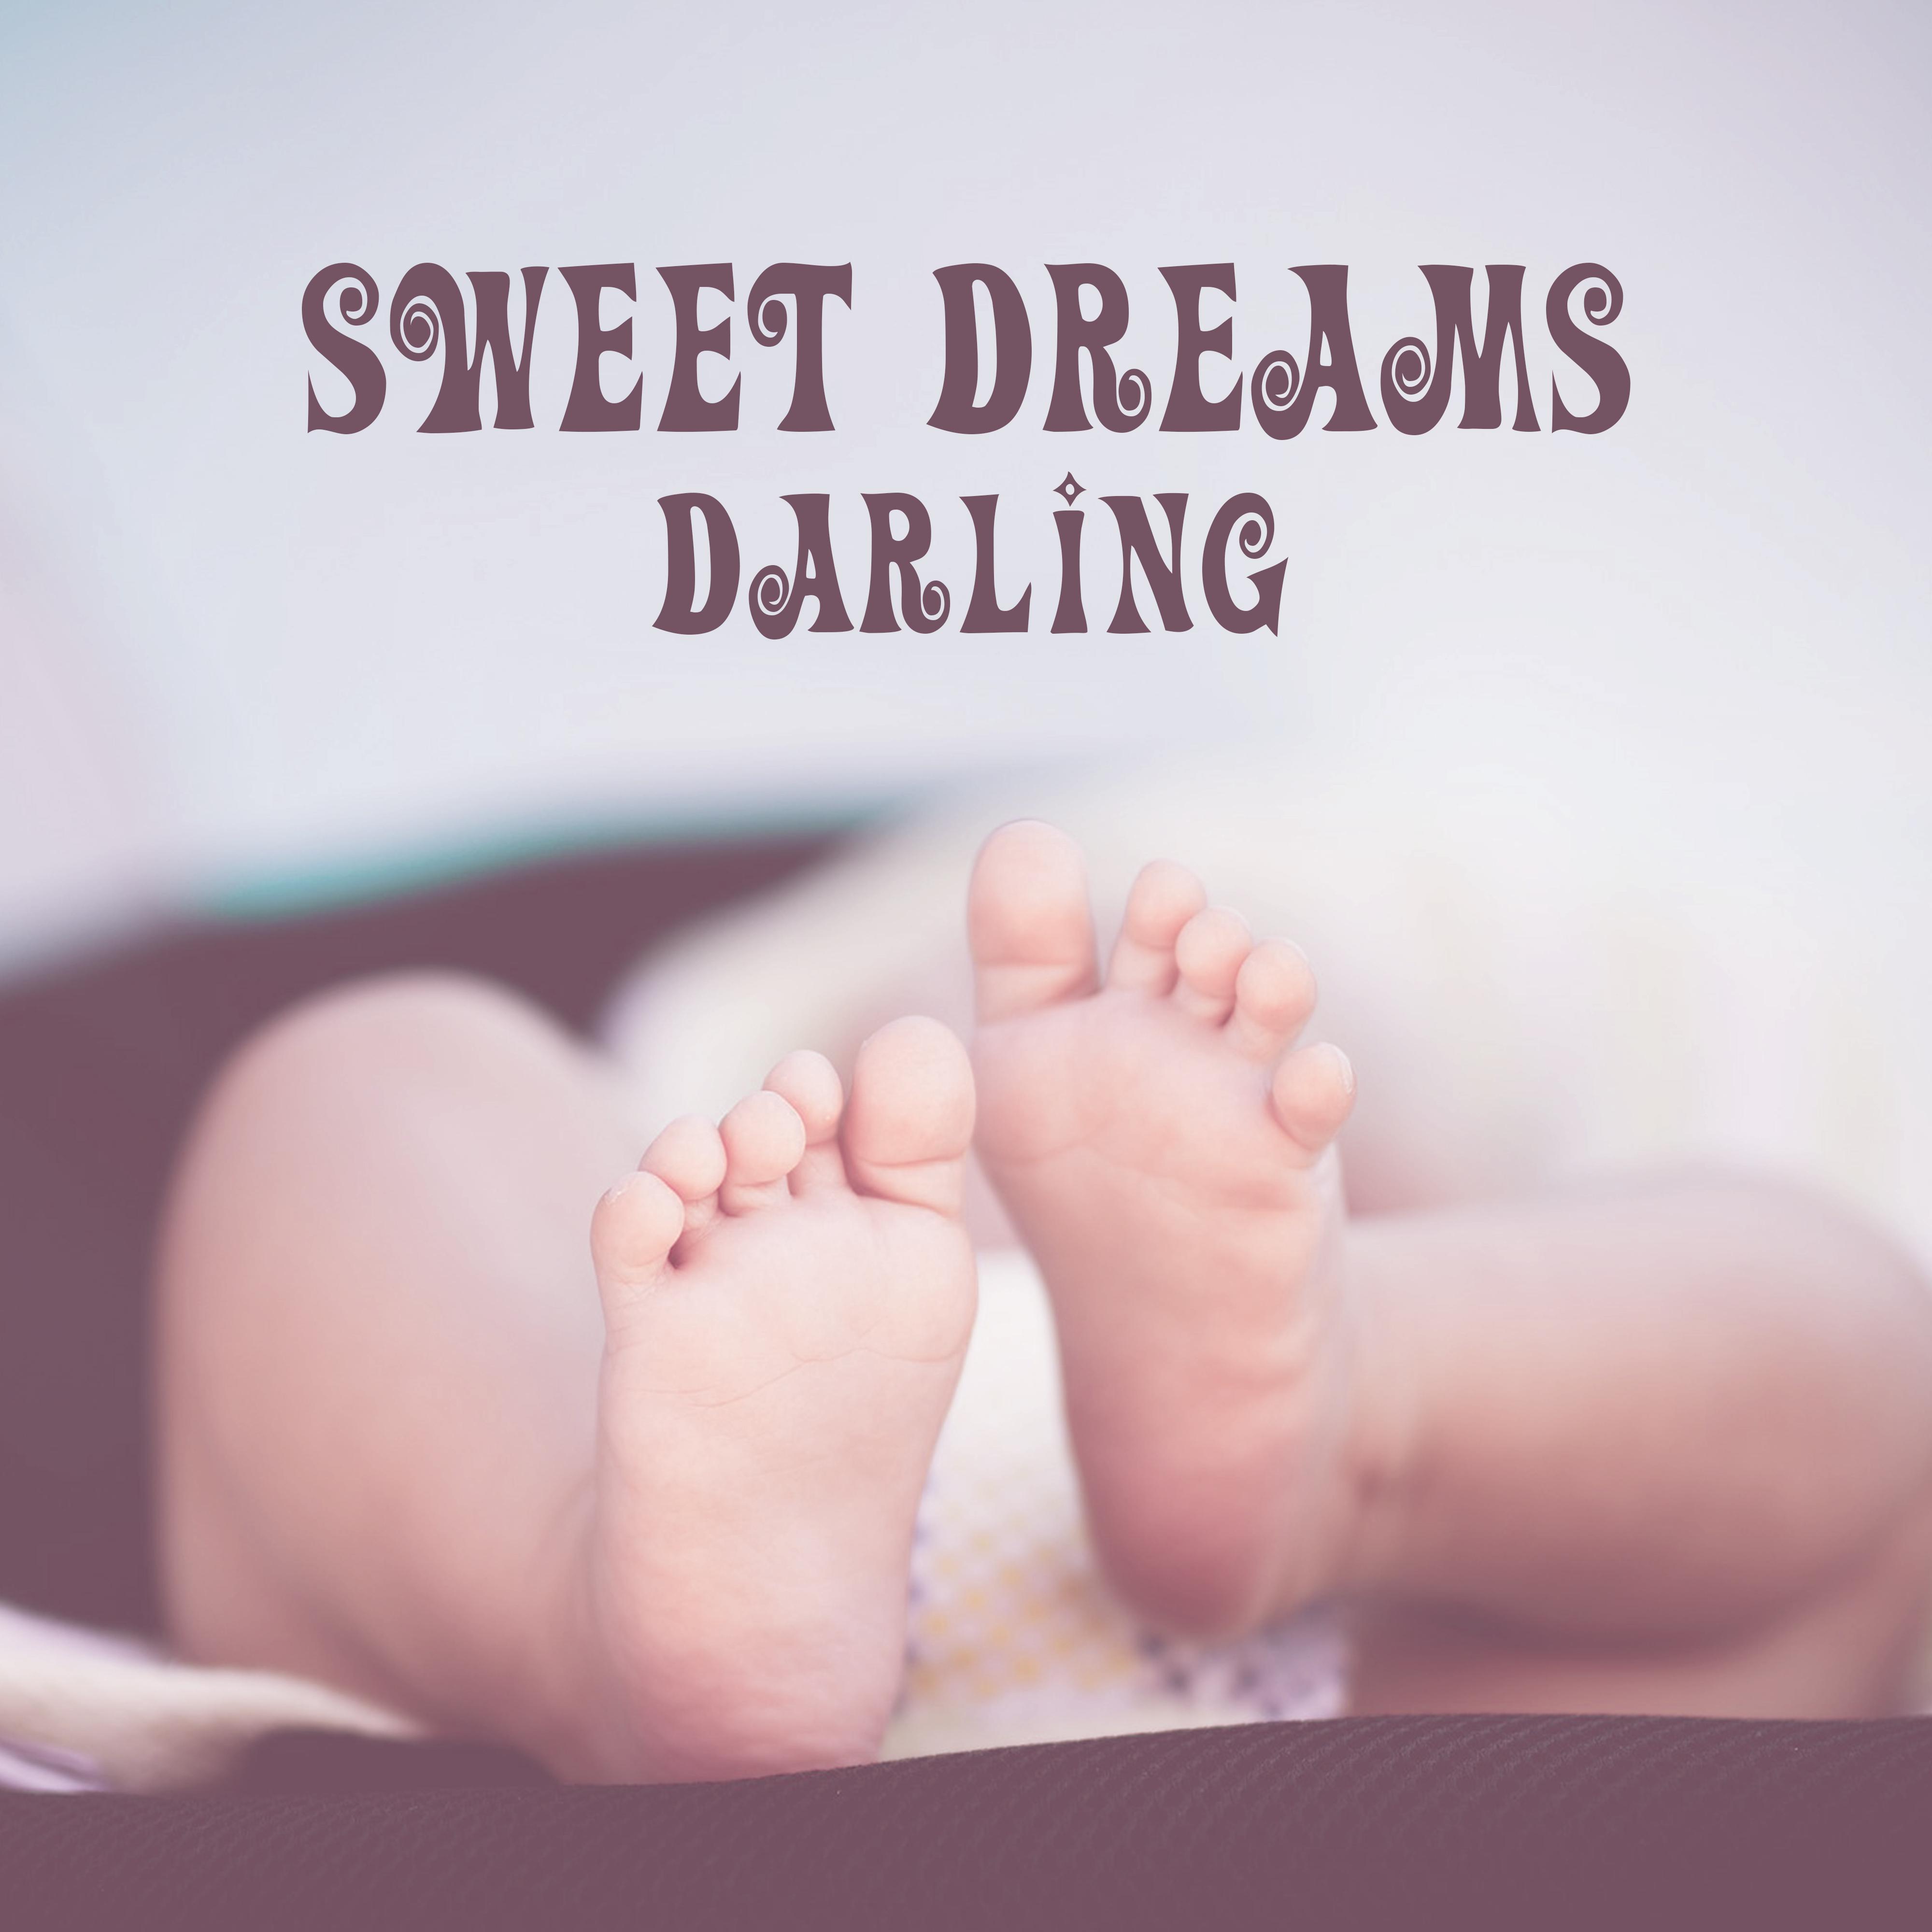 Sweet Dreams Darling  Healing Lullabies for Baby, Calm Night, Music at Goodnight